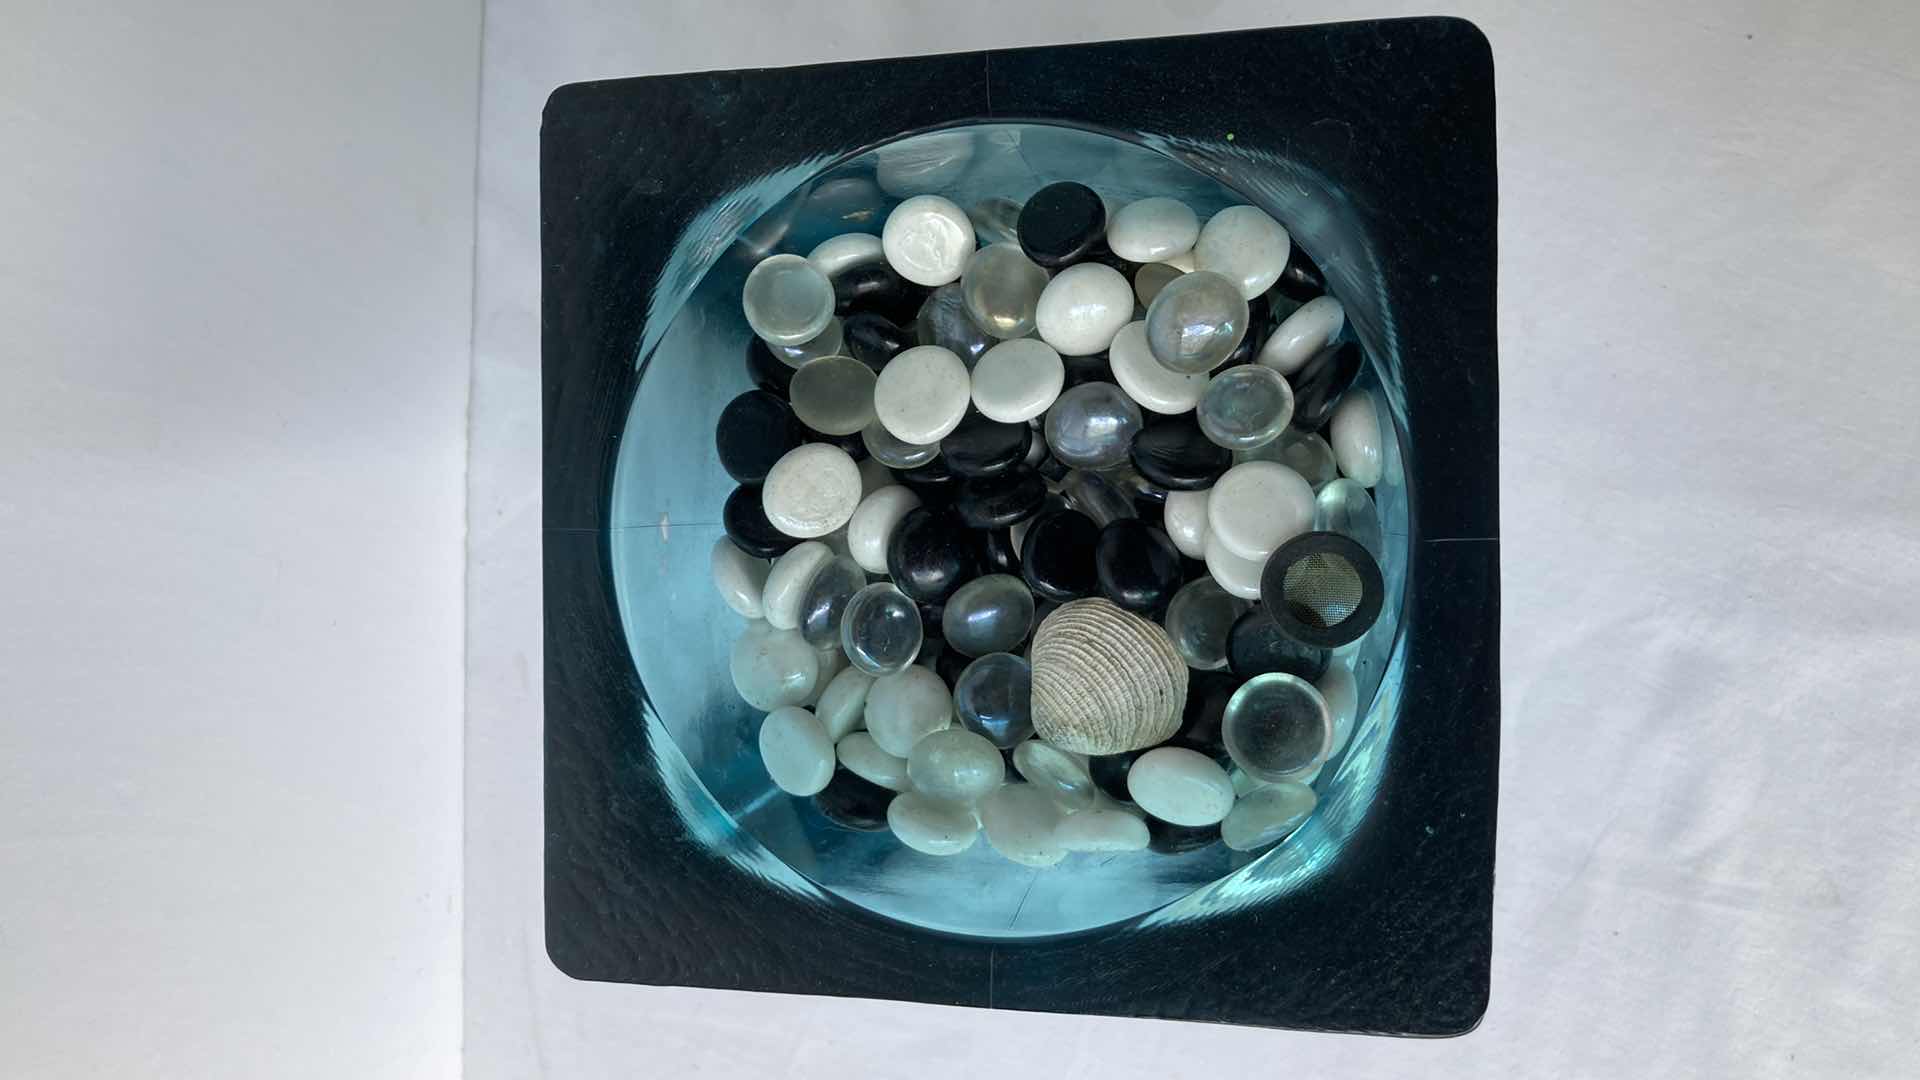 Photo 5 of TEAL CLEAR GLASS VASE W MARBLES 6.5” X 6.5” H11”